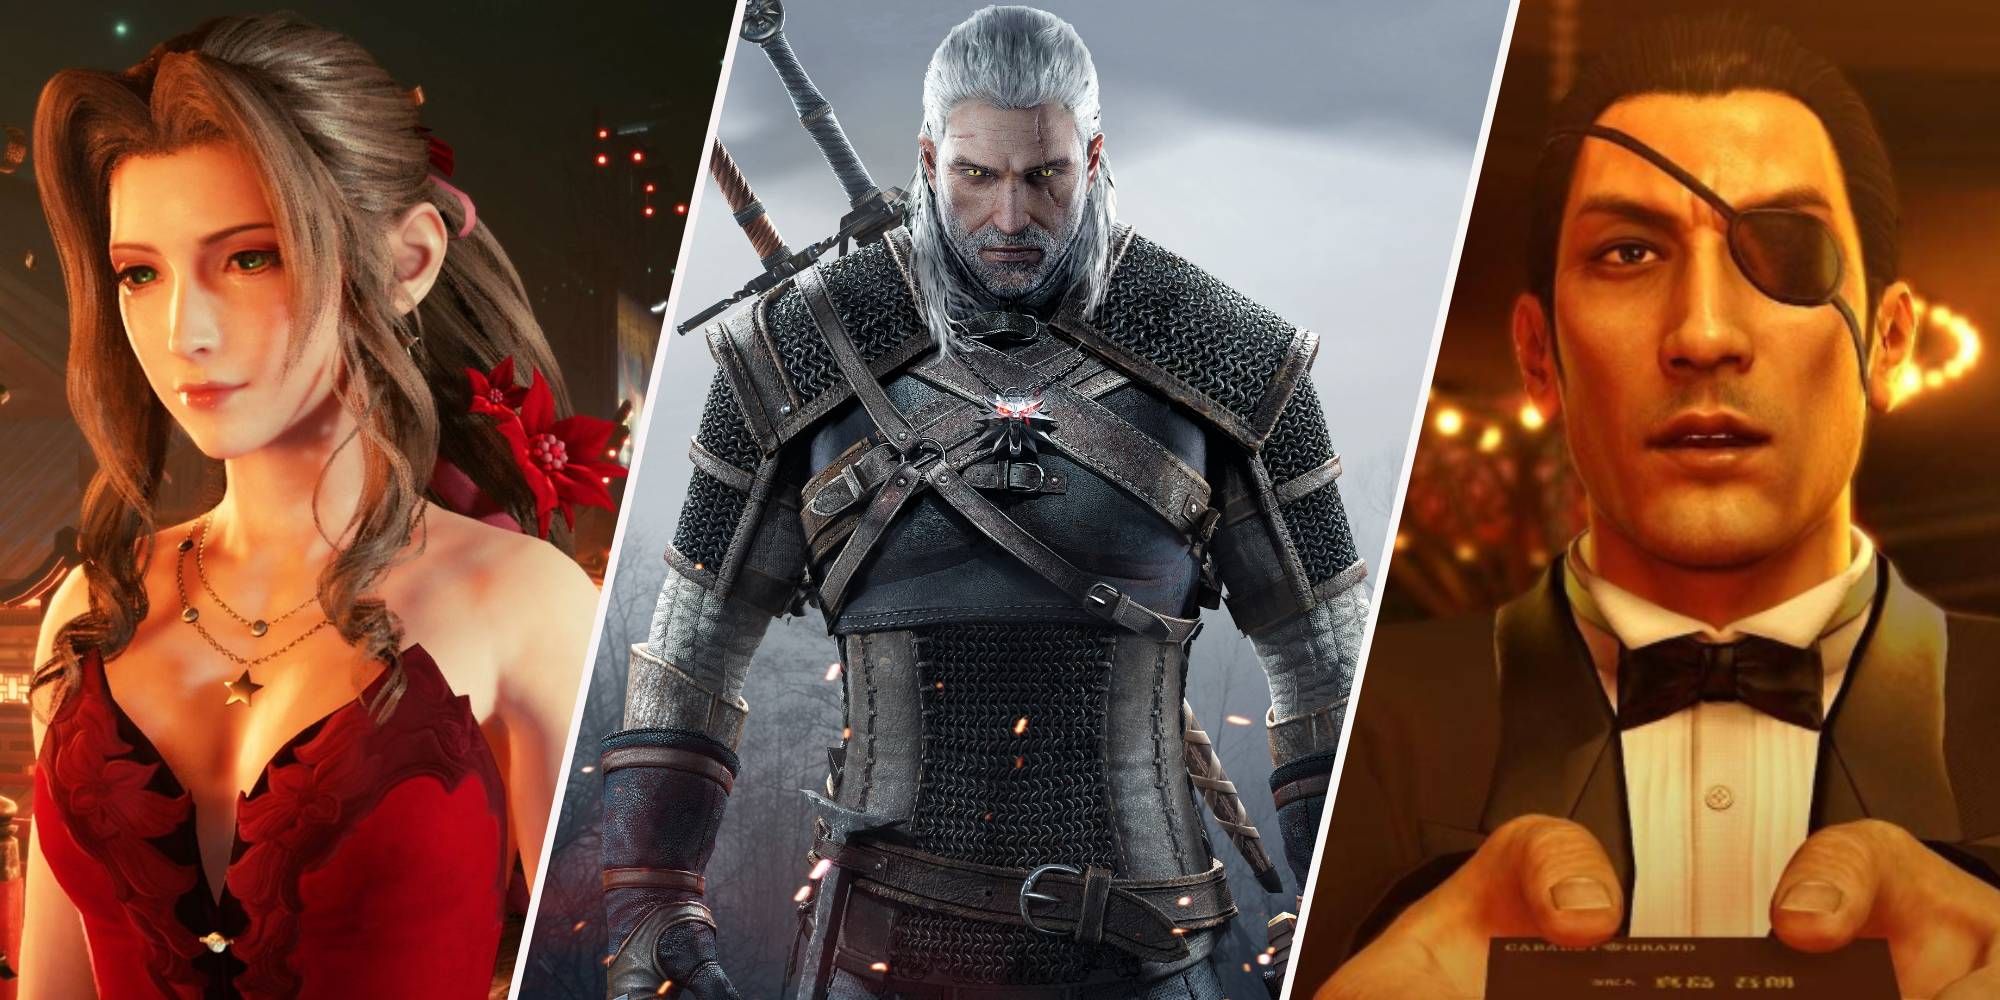 Top 10 Best RPGs (Role Playing Games) for PS4